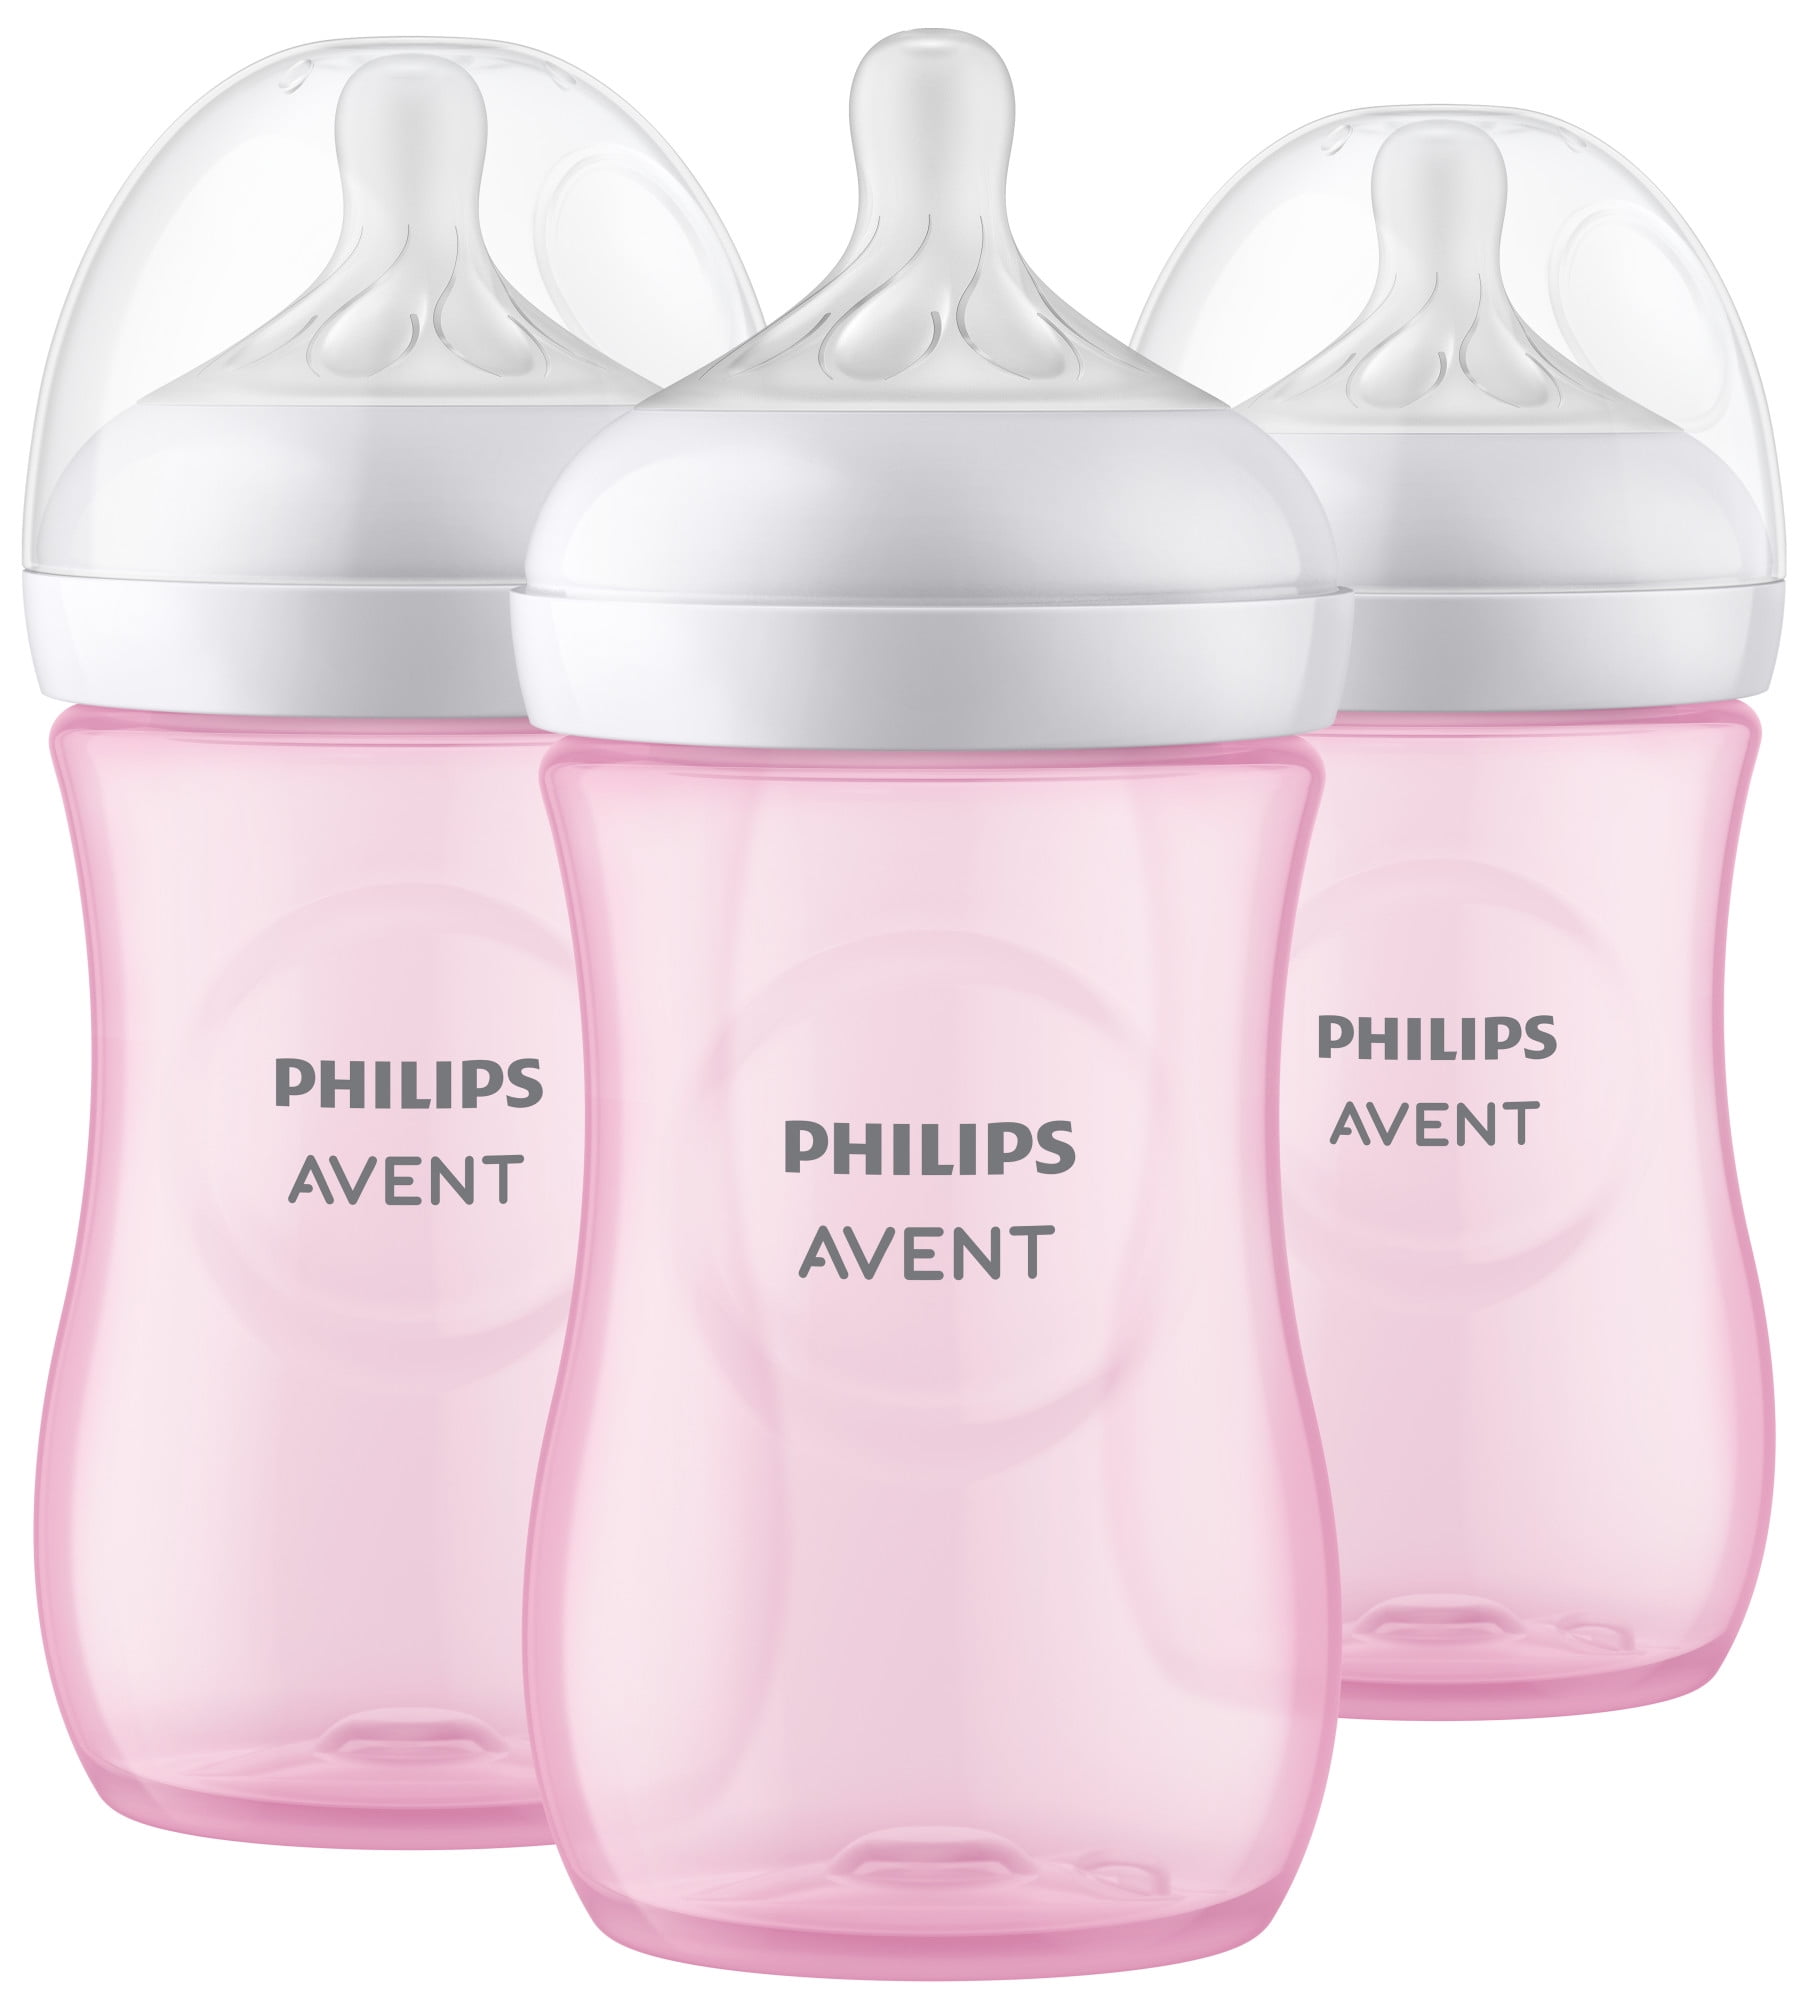 Philips Avent 3pk Natural Baby Bottle with Natural Response Nipple - Clear  - 9oz